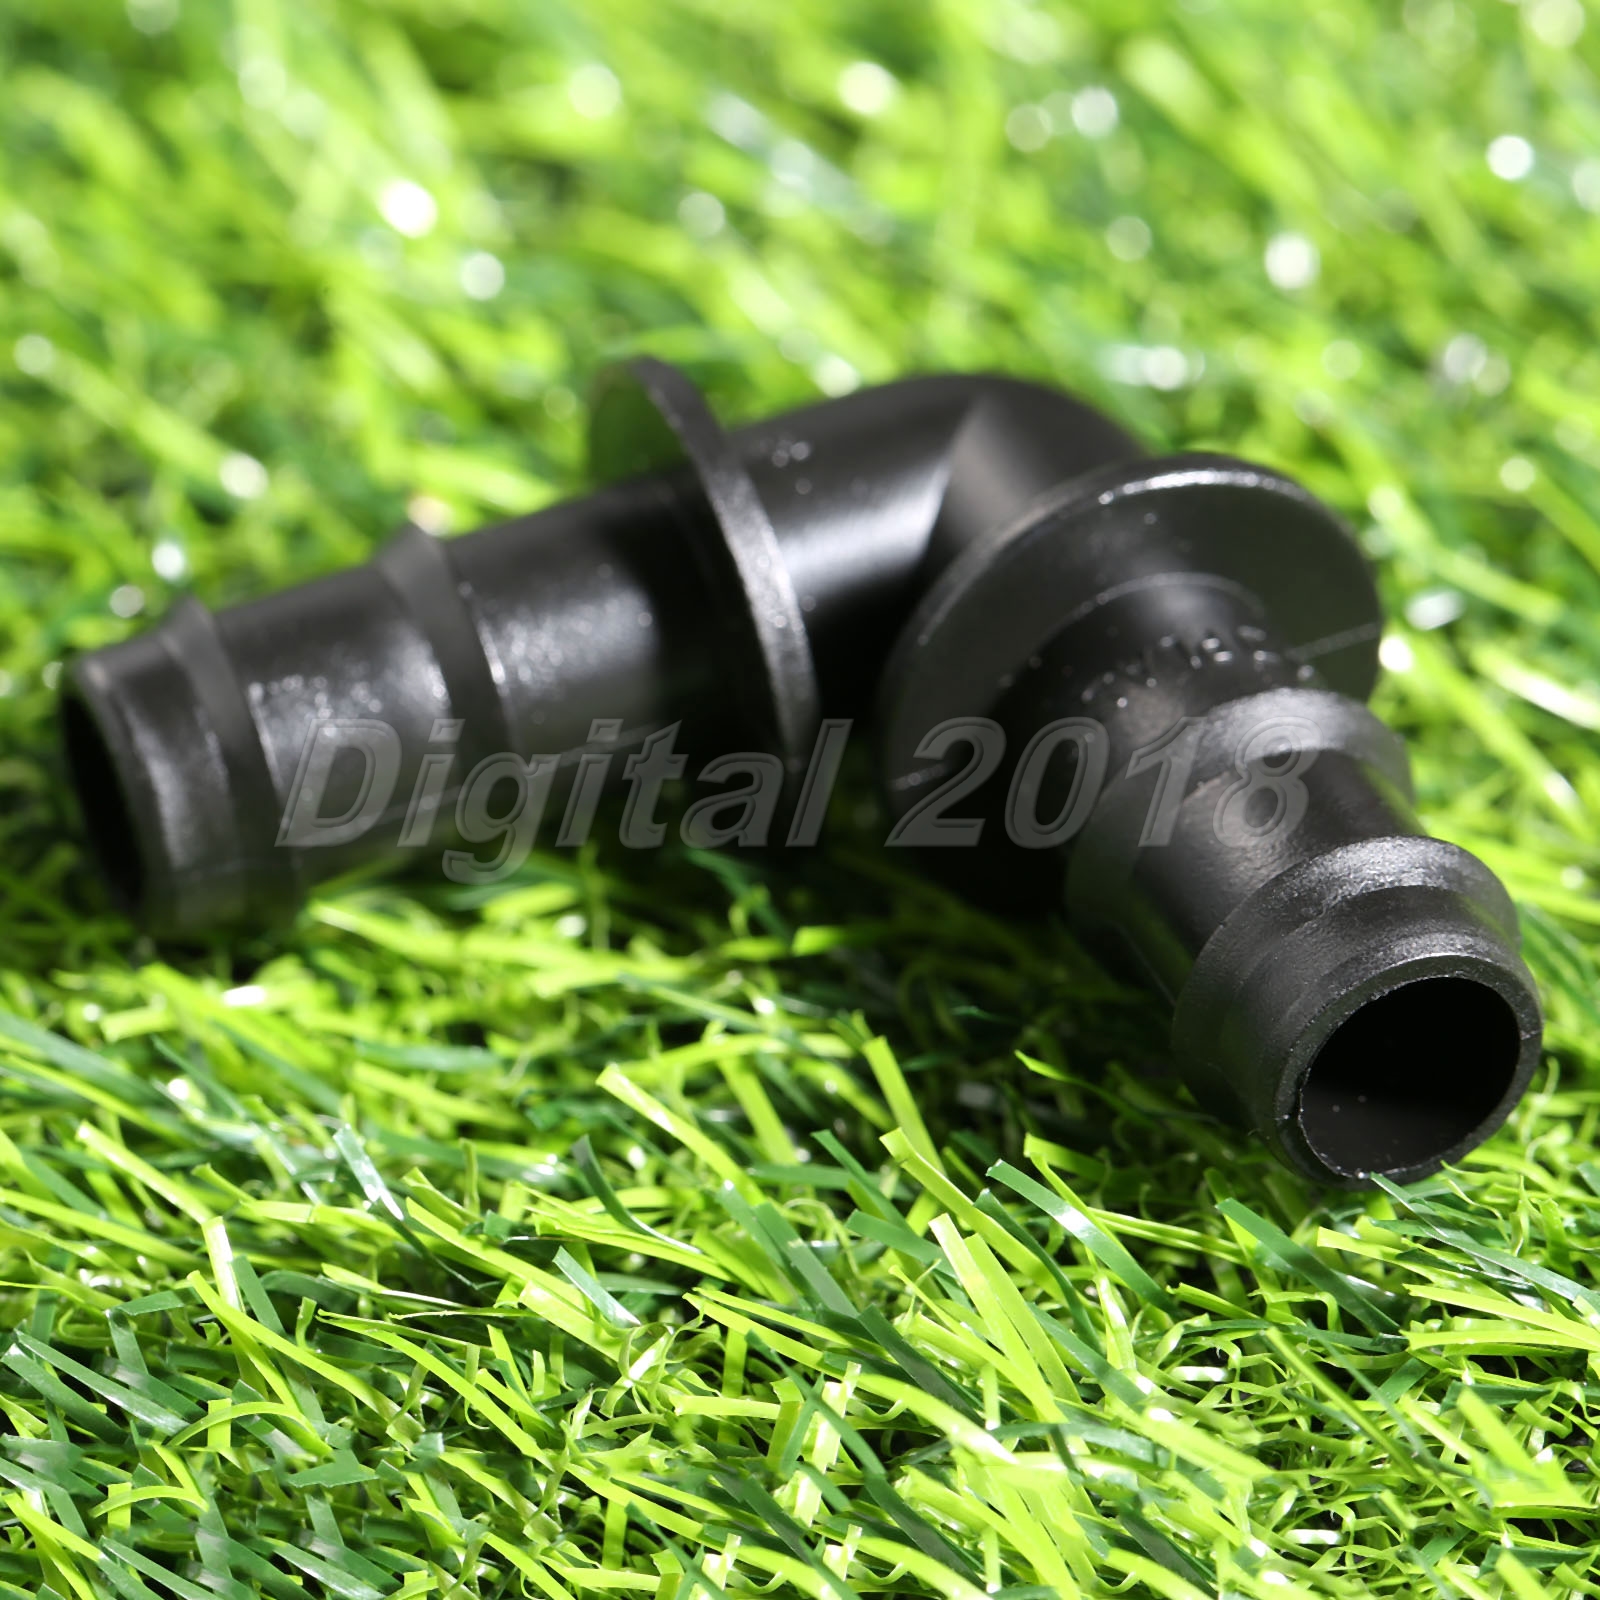 12mm Garden Irrigation Connector 90 Degree Elbow Angle Bend Pipe Fittings 100X 